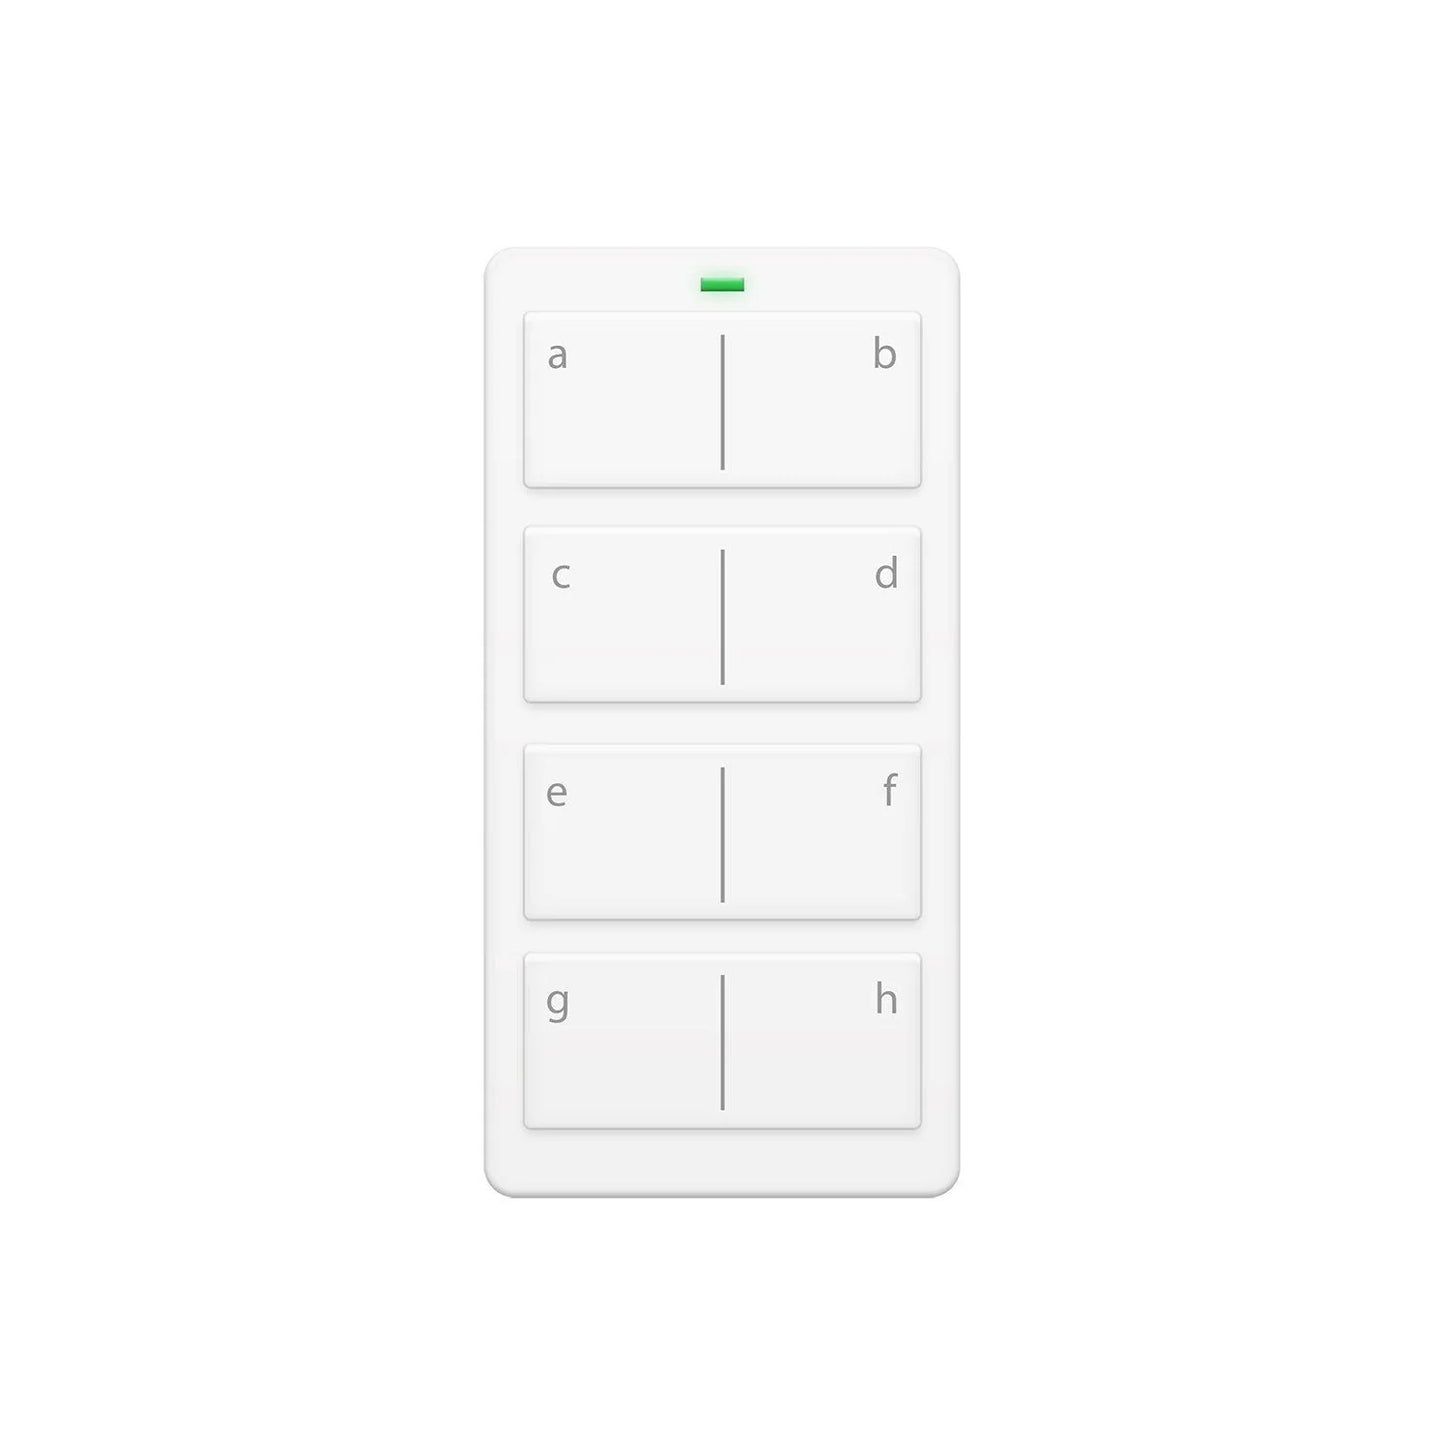 Insteon Mini-remote 8 scenes keypad - Device and engraving